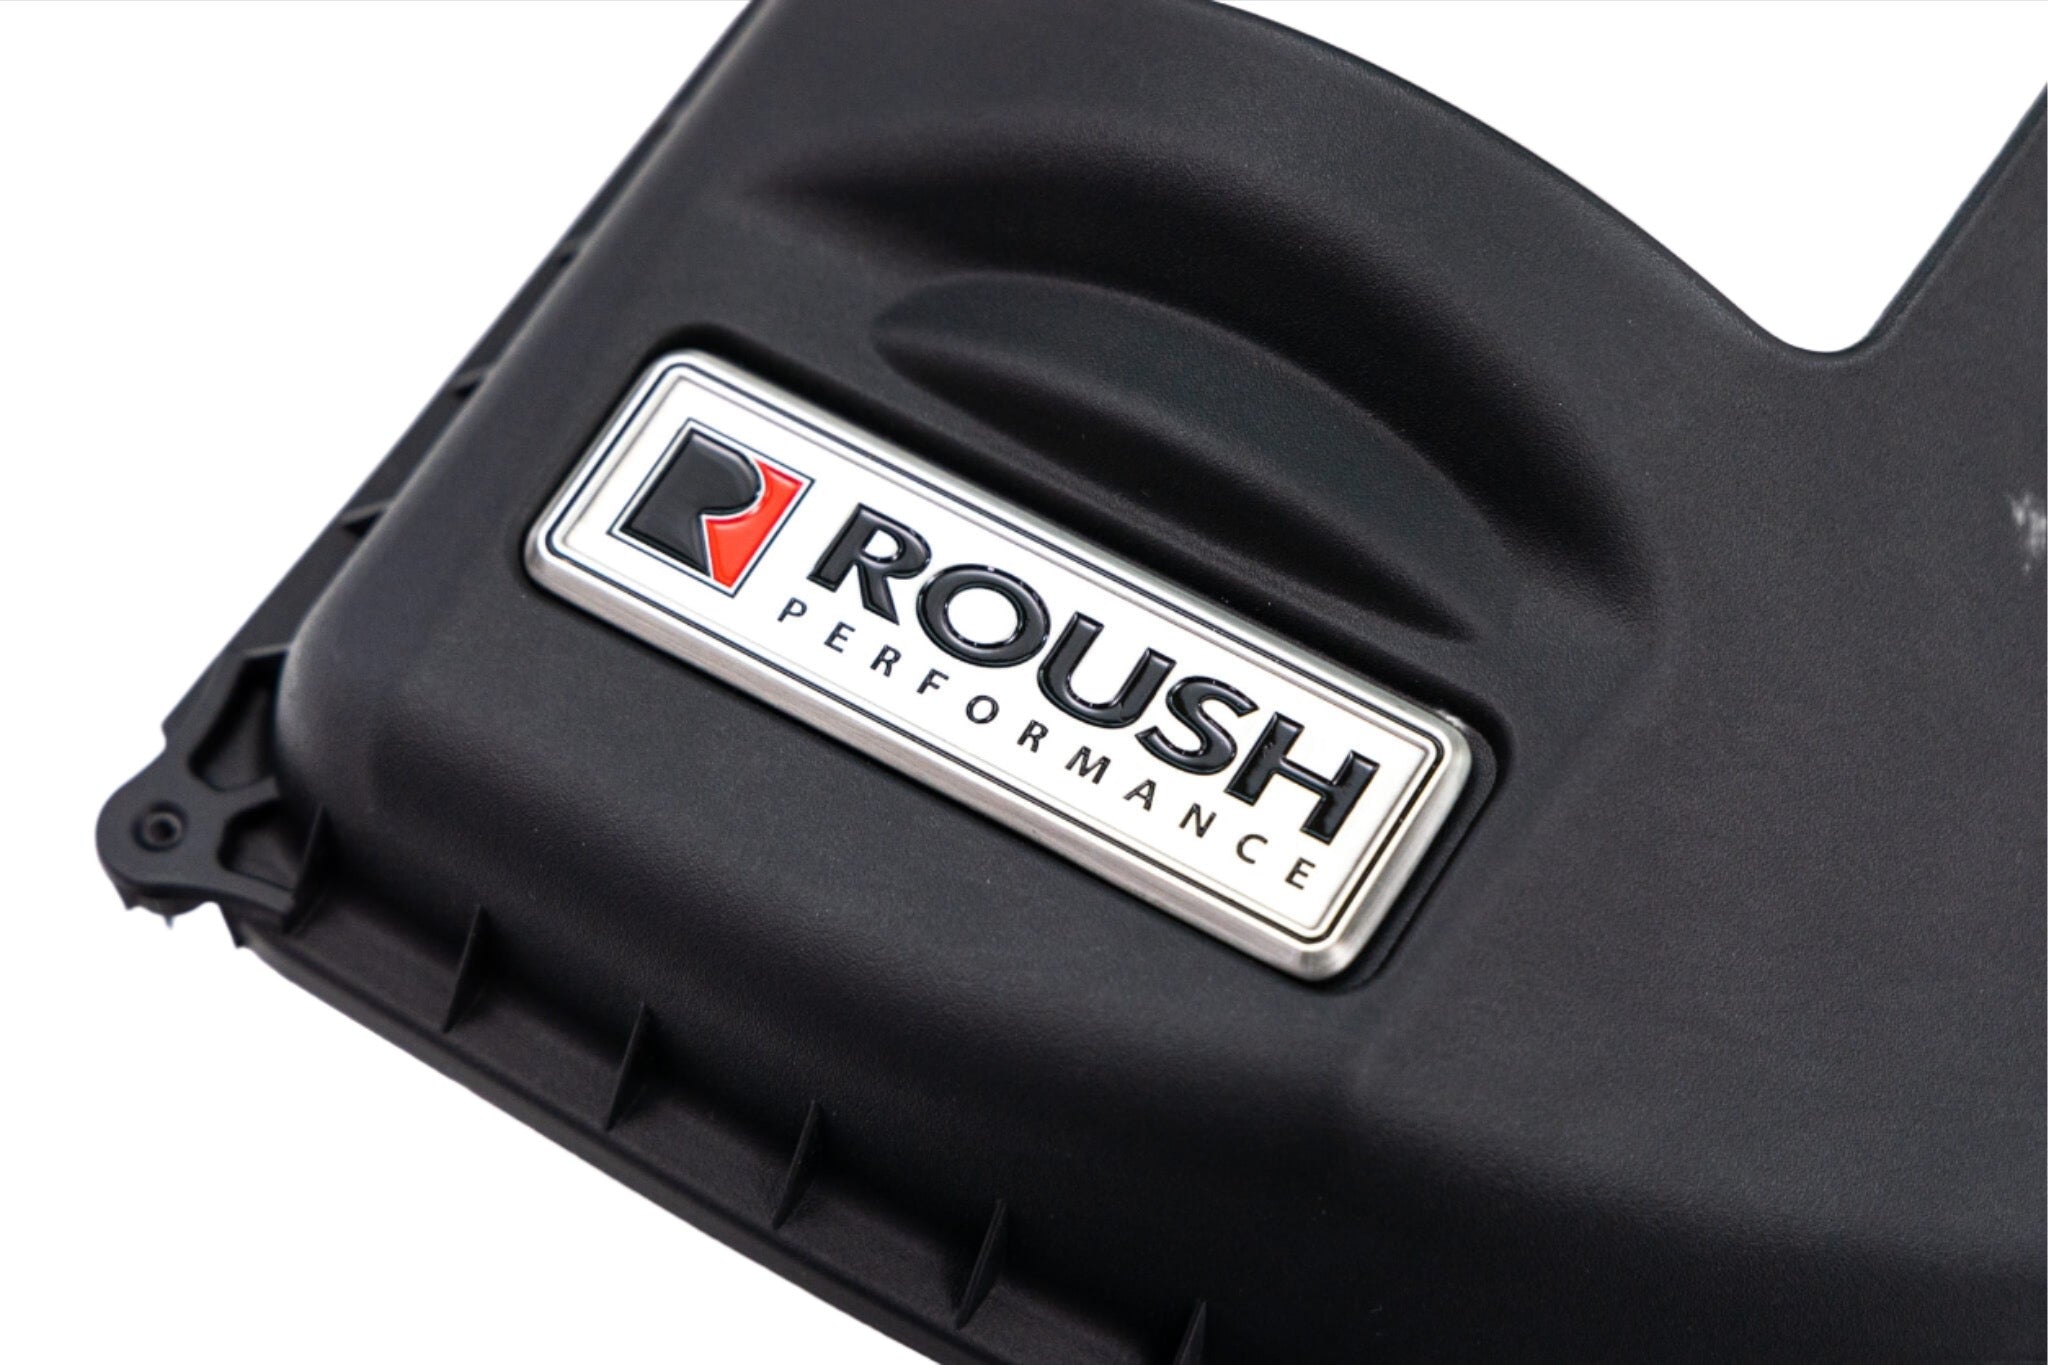 Featured Cold Air Intake Parts – Roush Performance Products, Inc.